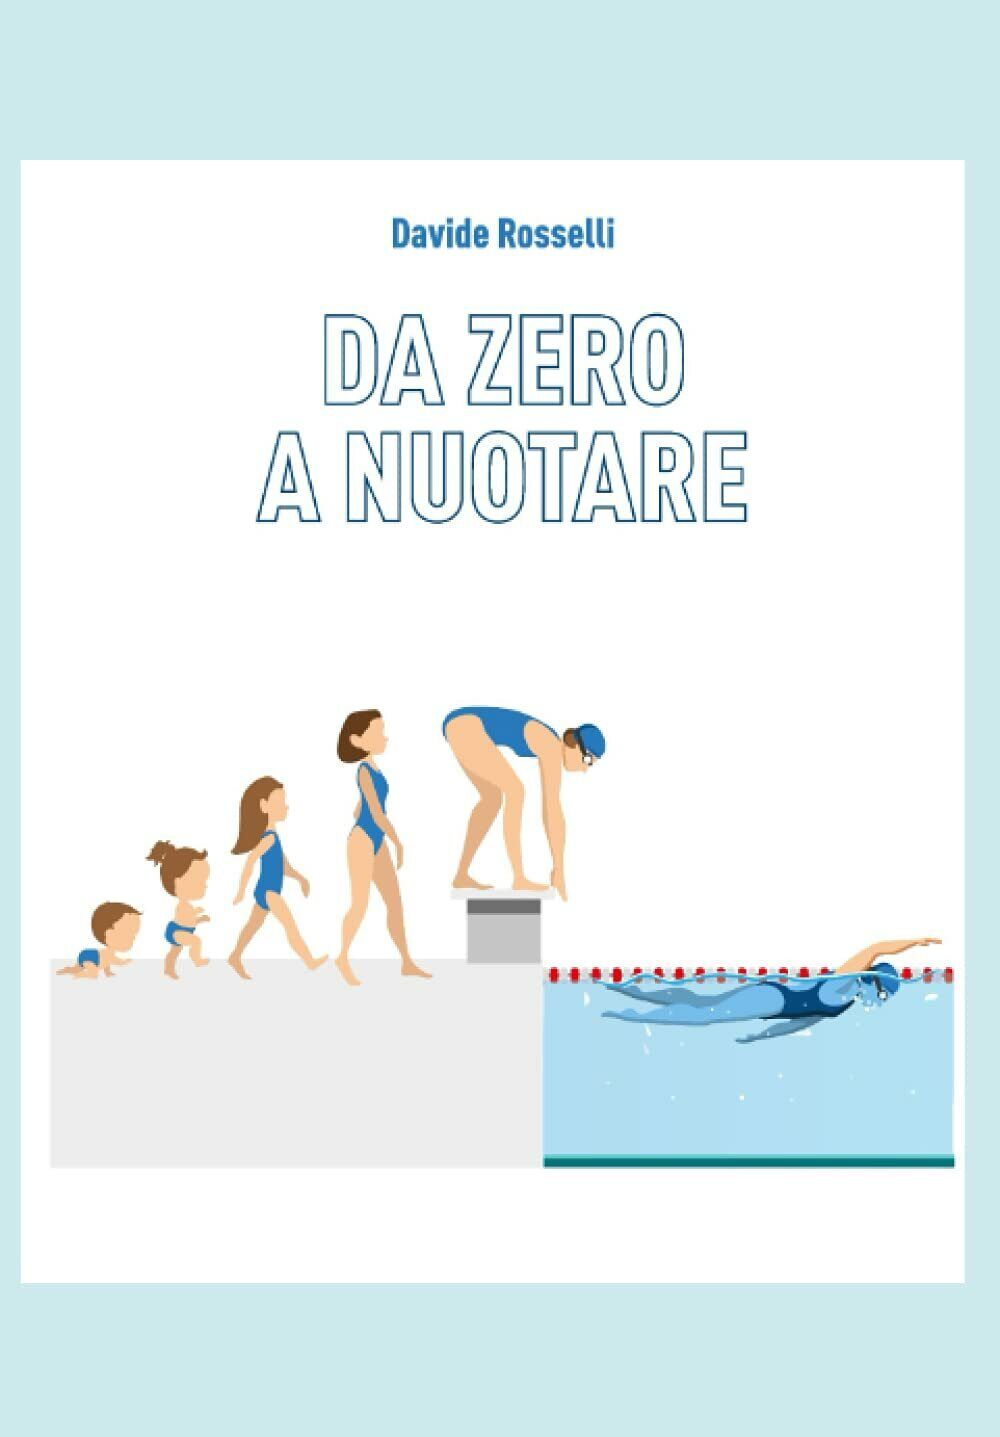 DA 0 A NUOTARE - Davide Rosselli - Independently published, 2021